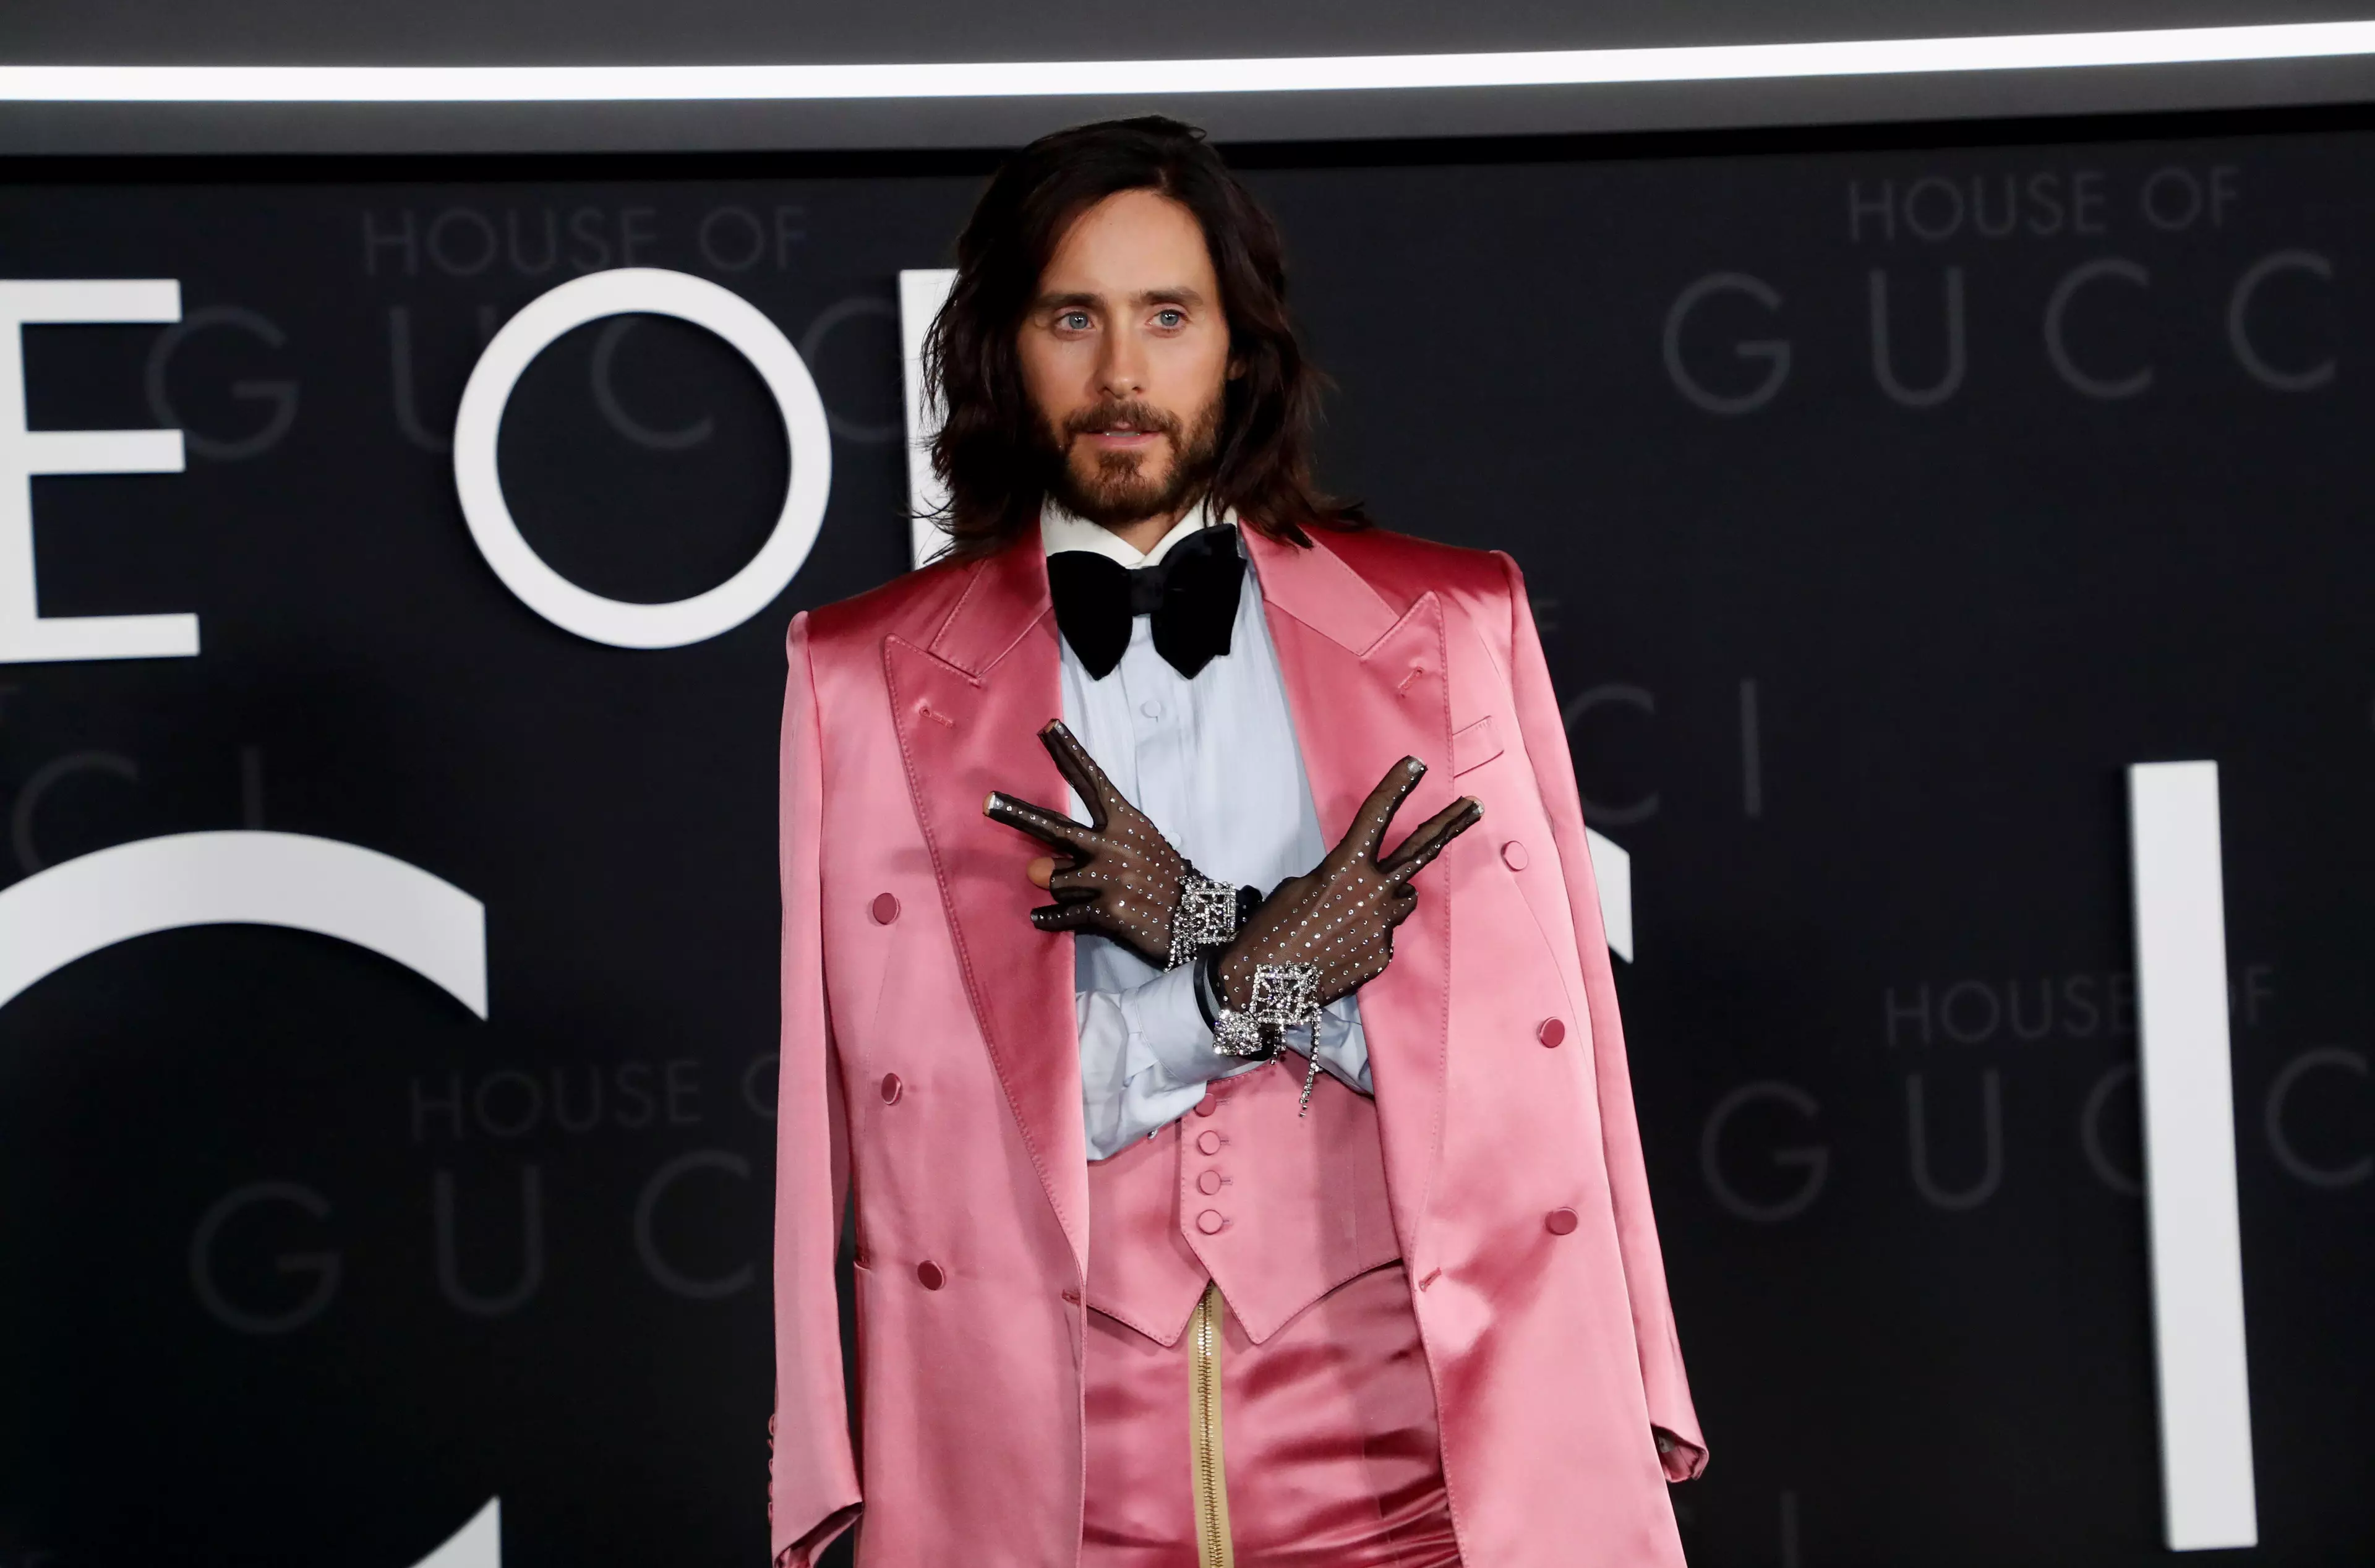 Leto really immersed himself in the role.